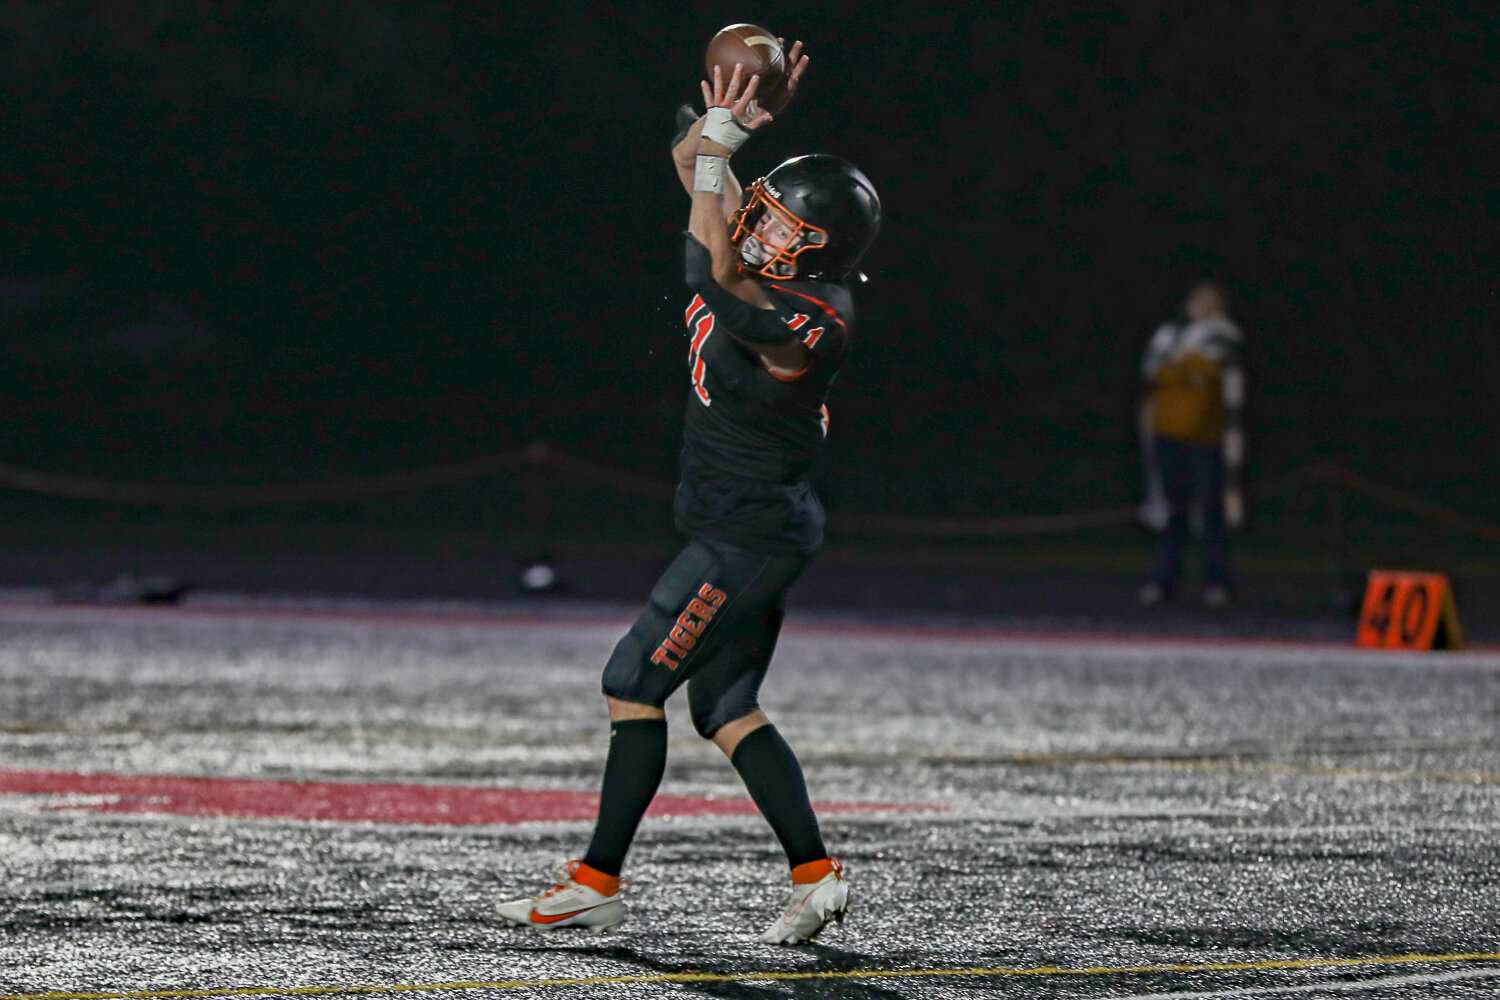 Colin Shields secures a catch during a 43-14 Napavine win over River View on Nov. 18.